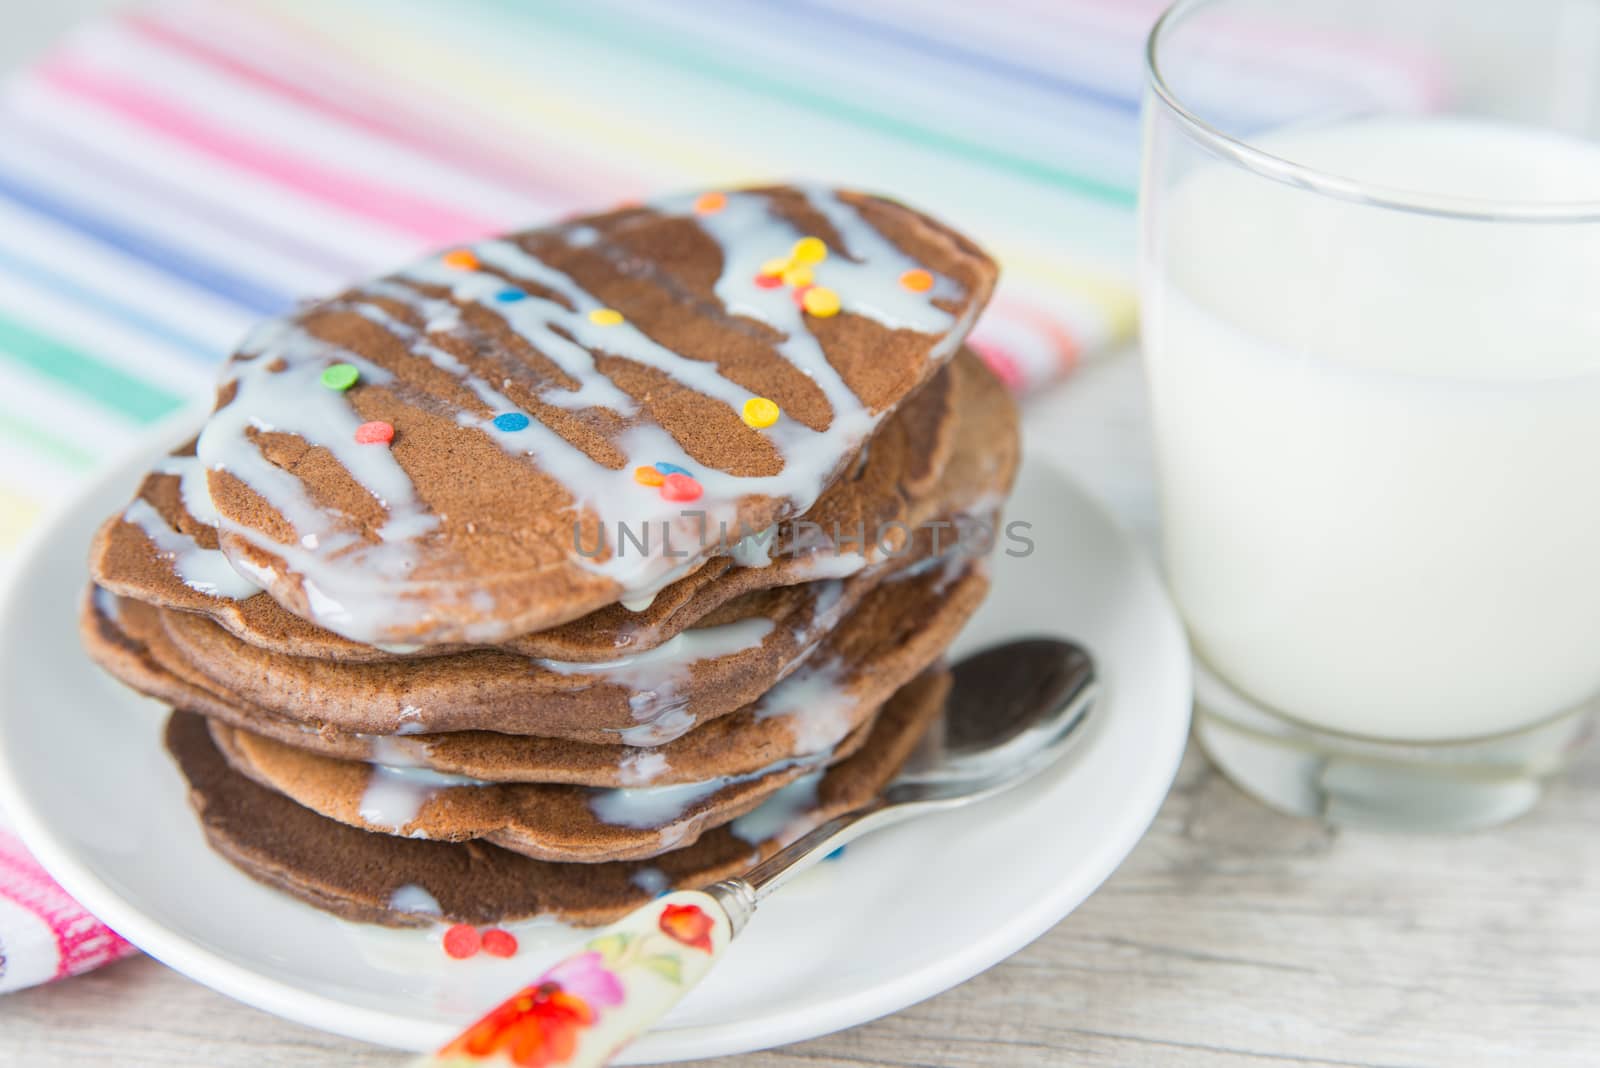 Decorated chocolate pancakes with milk by Linaga